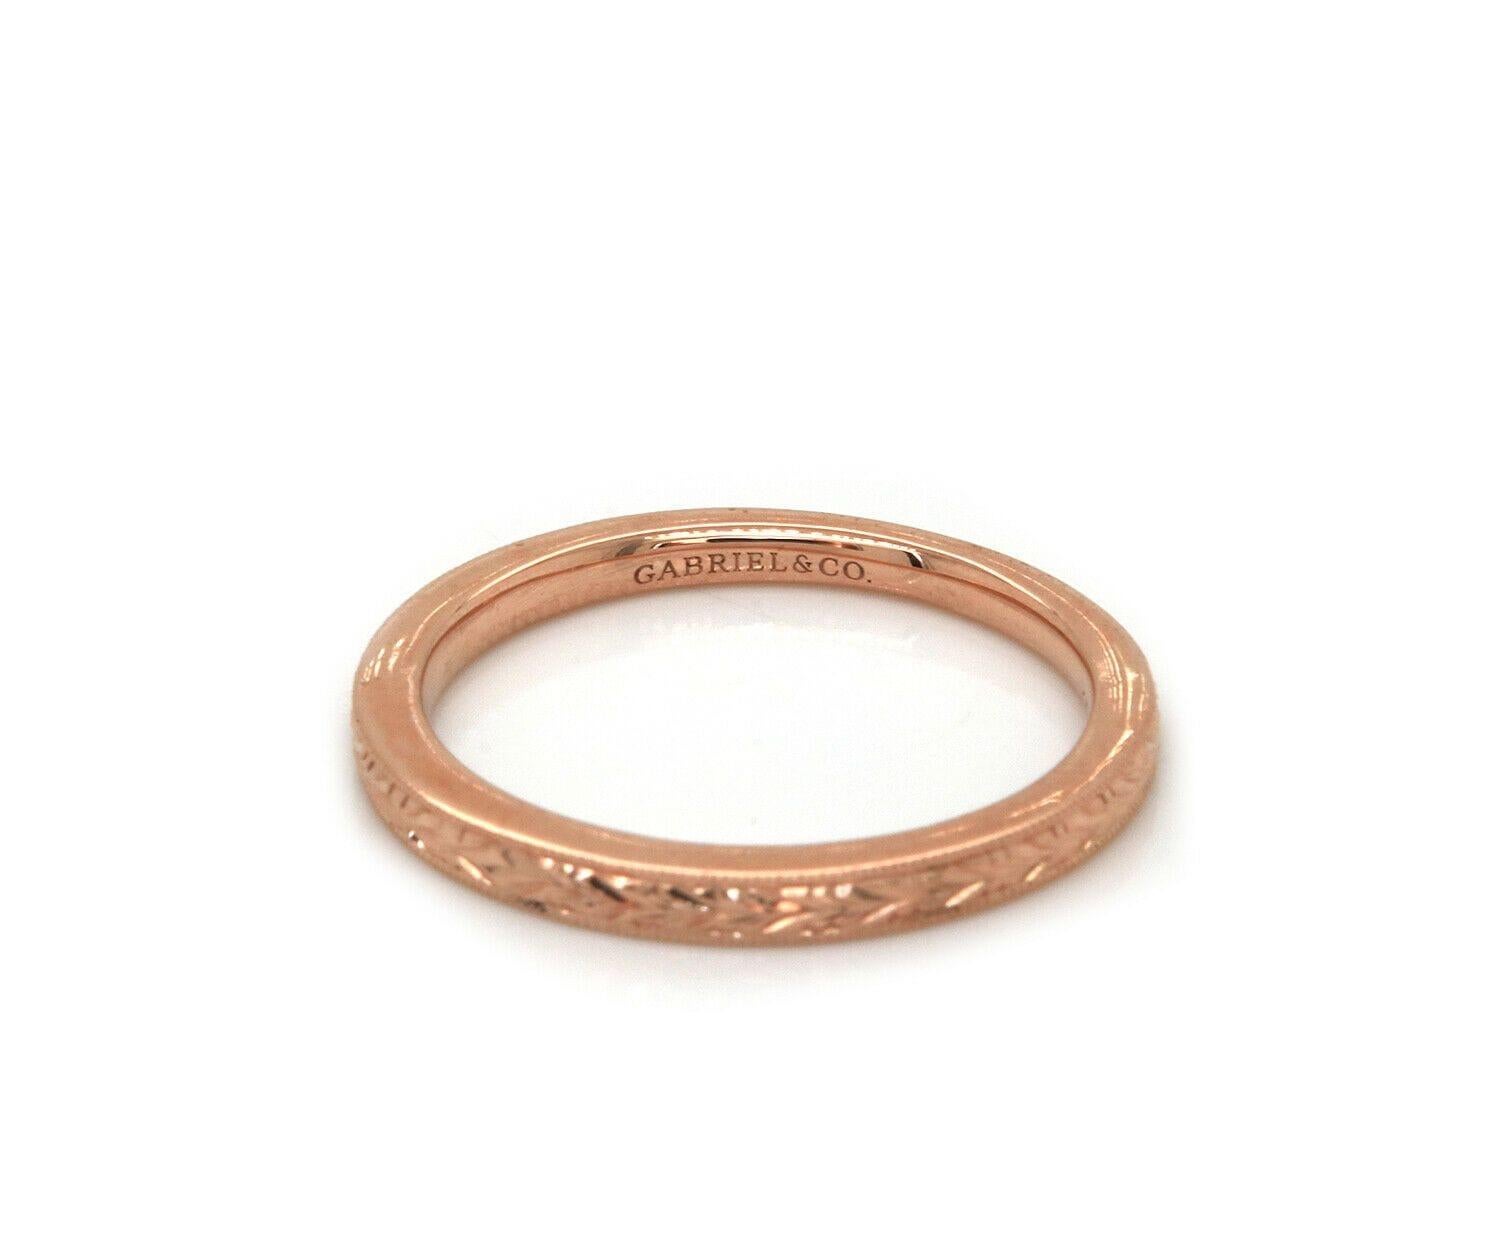 New Gabriel & Co. Filigree Engraved Band Ring in 14K Rose Gold For Sale 1